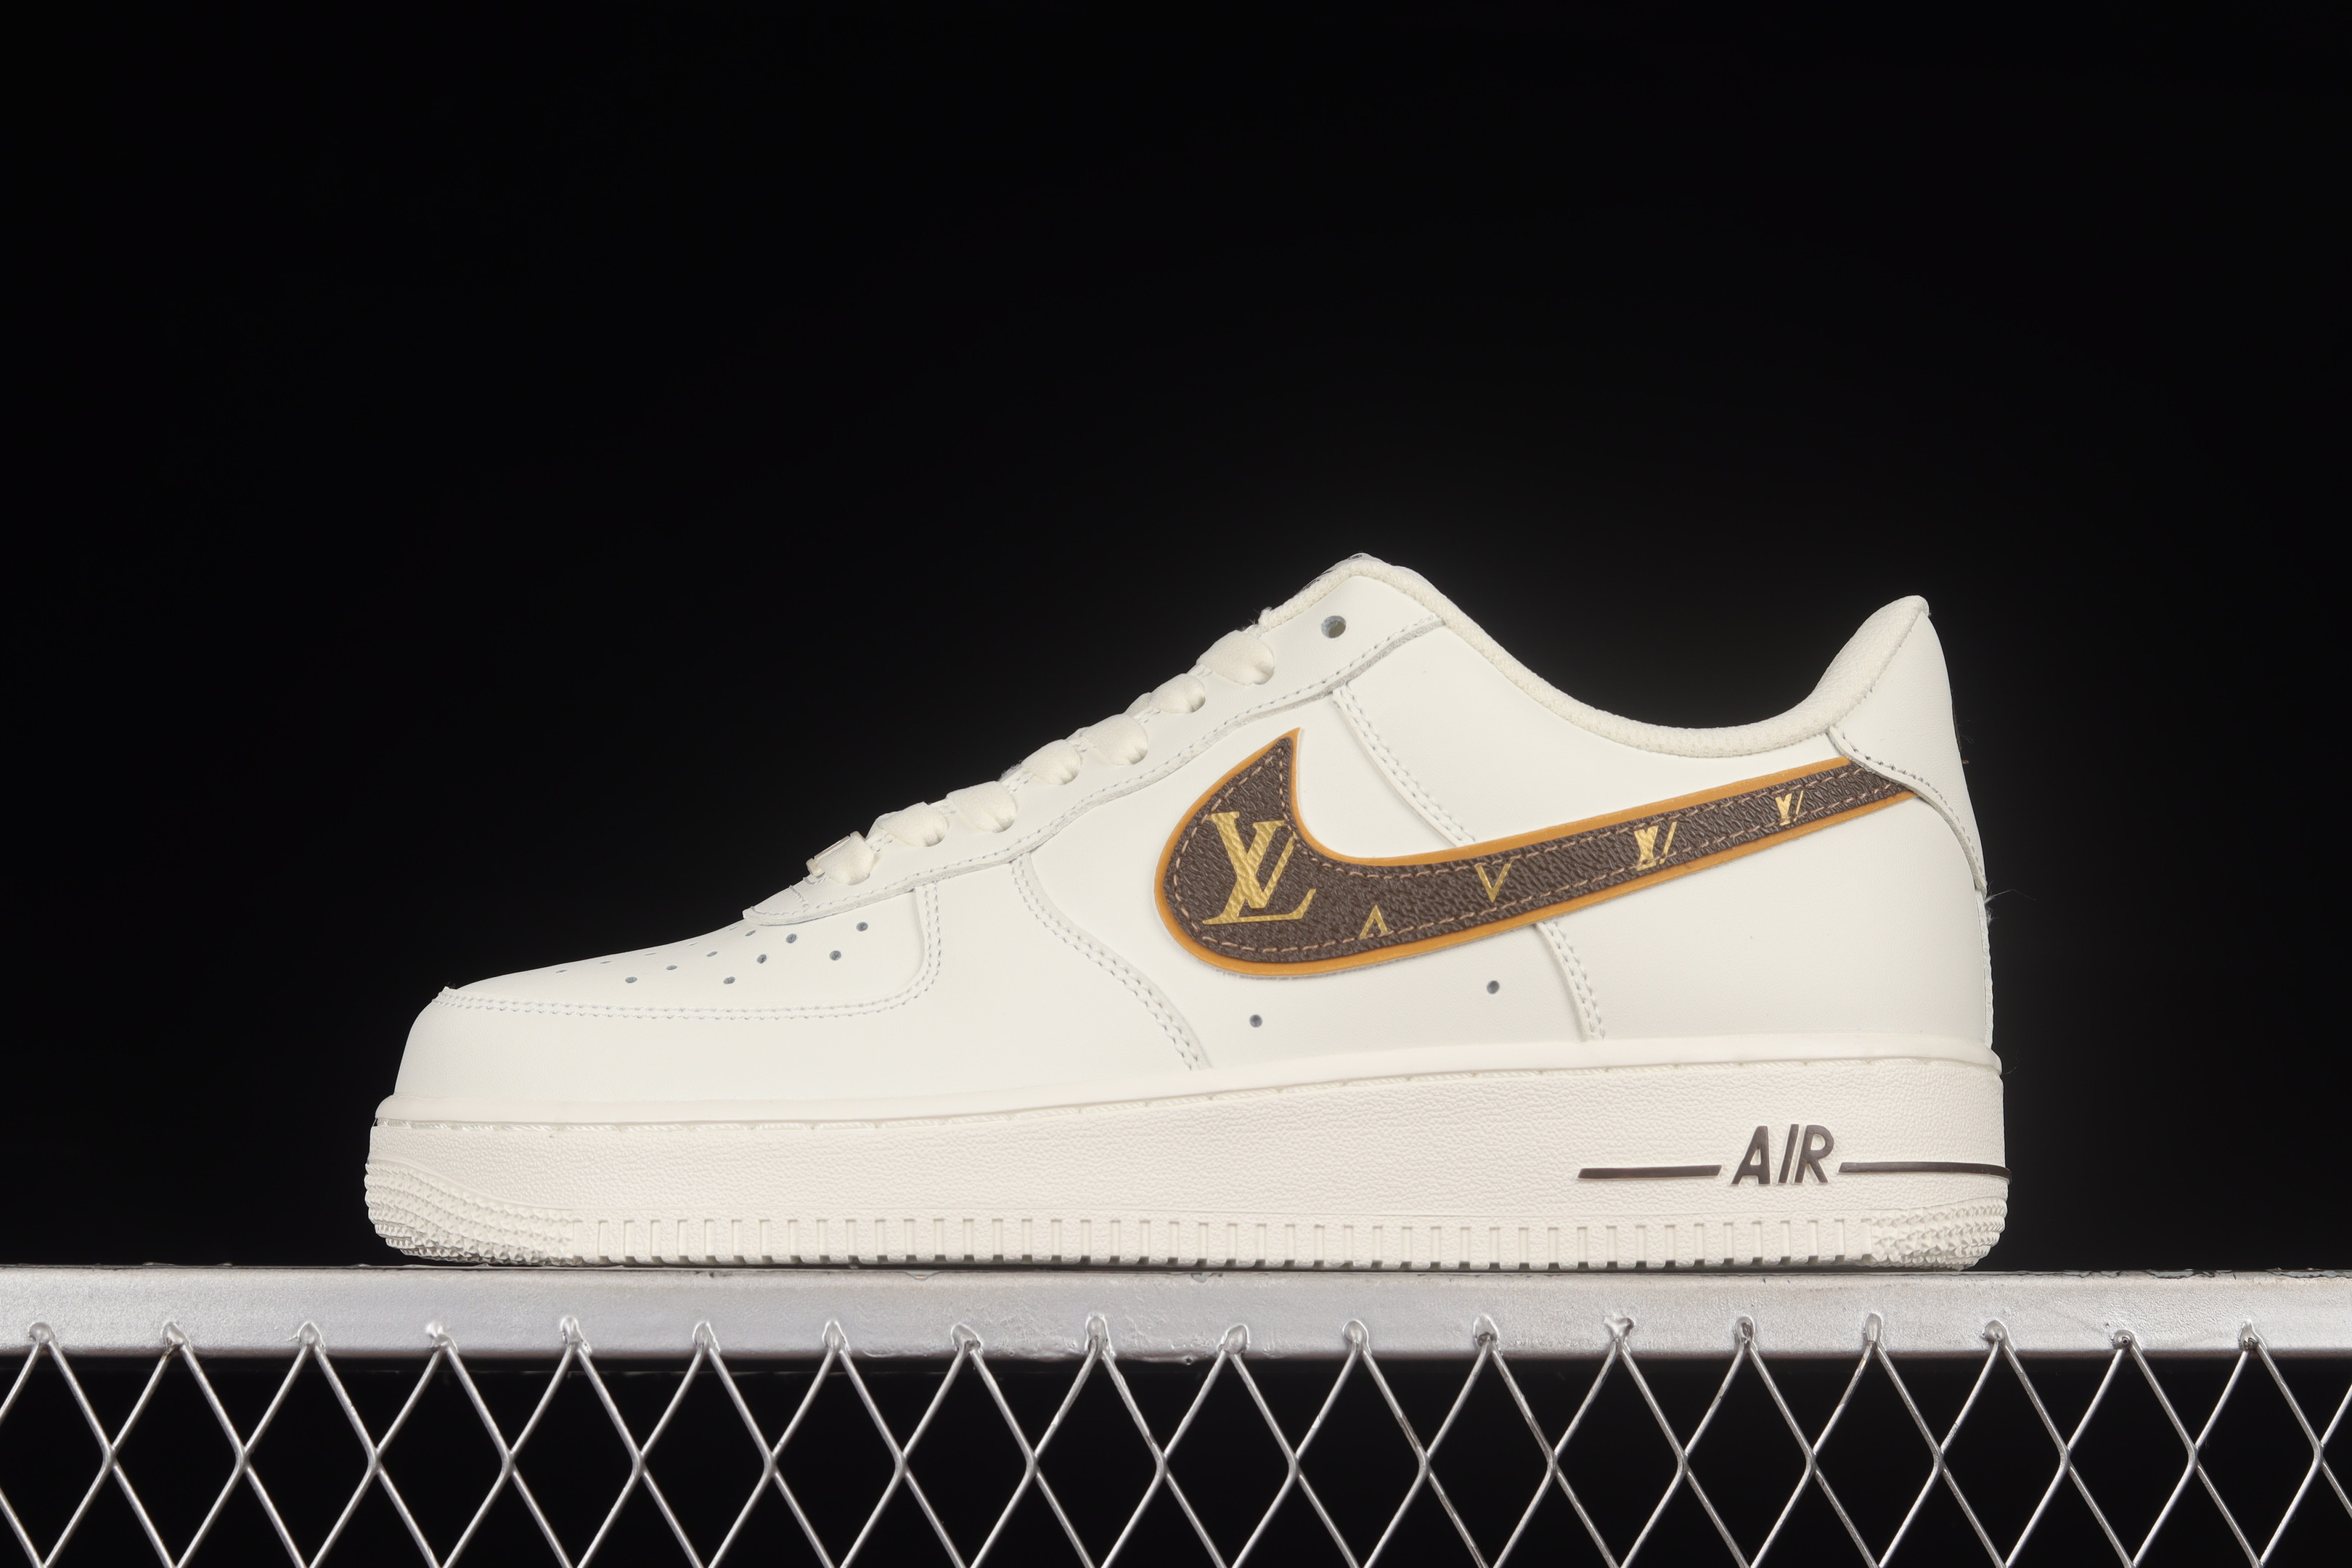 Louis Vuitton x Nike Air Force 1 07 Low Rice White Shoes Sneakers SNK464464128